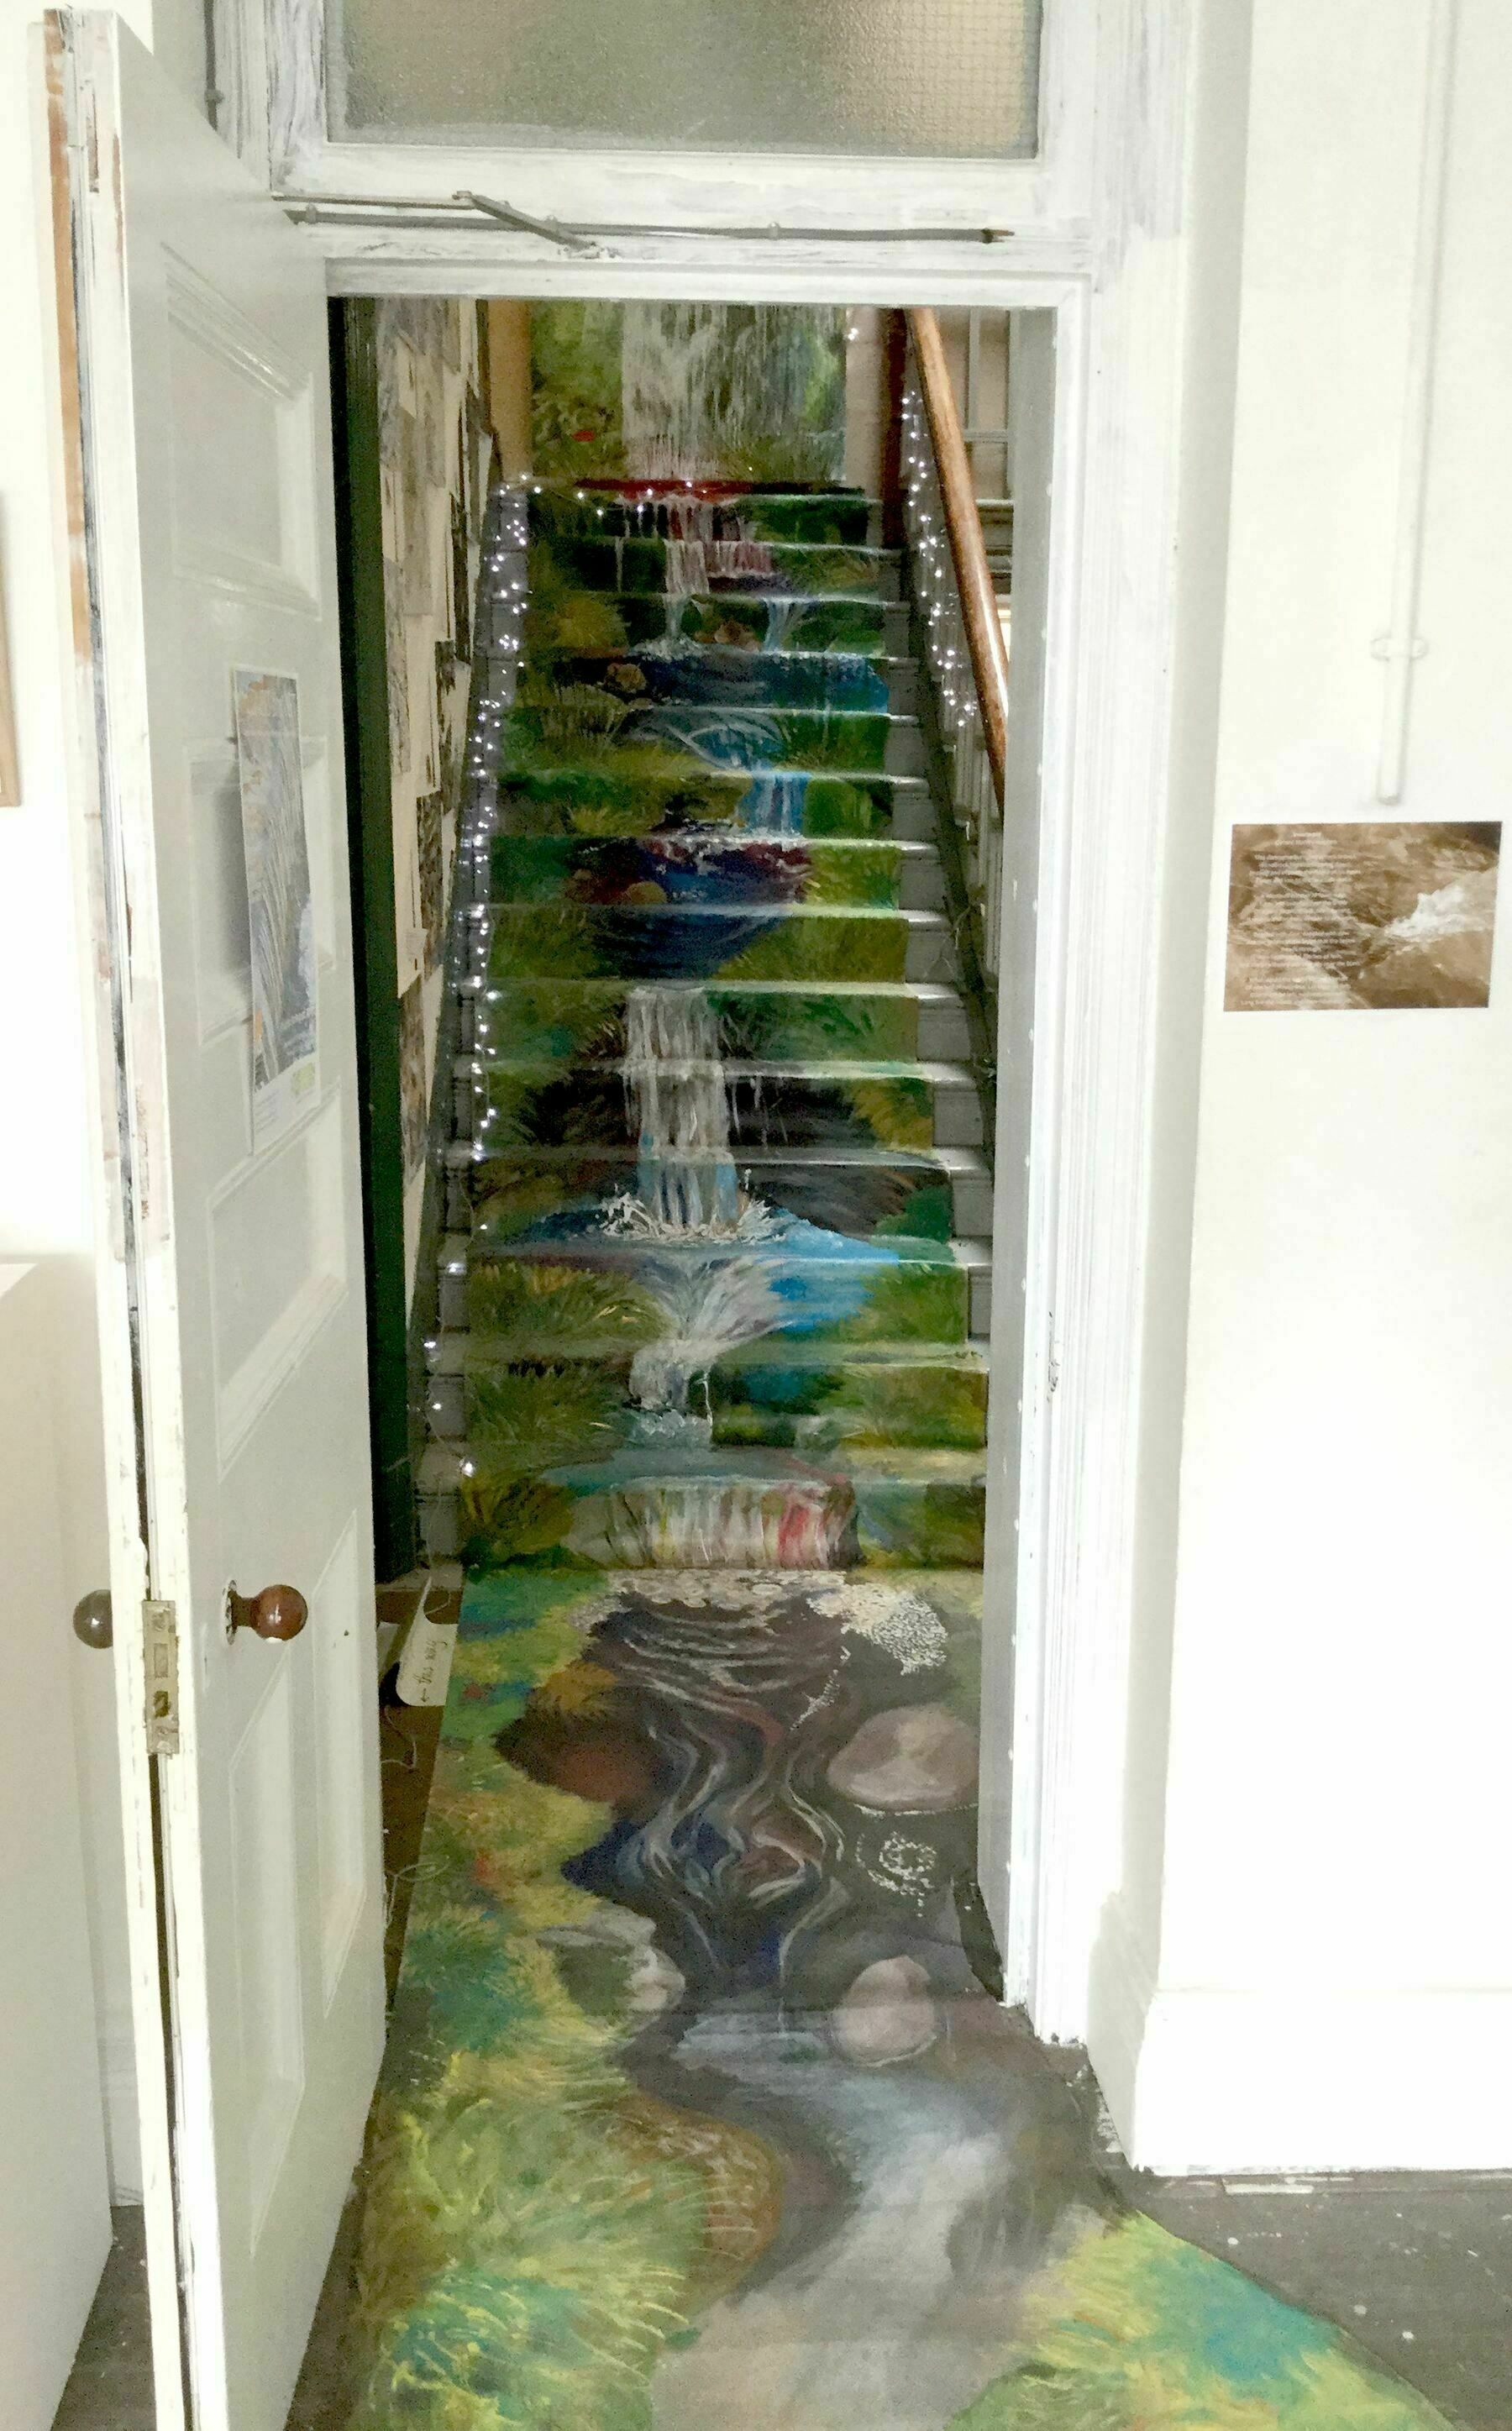 A waterfall painted on to stairs and flowing through a doorway at the bottom.